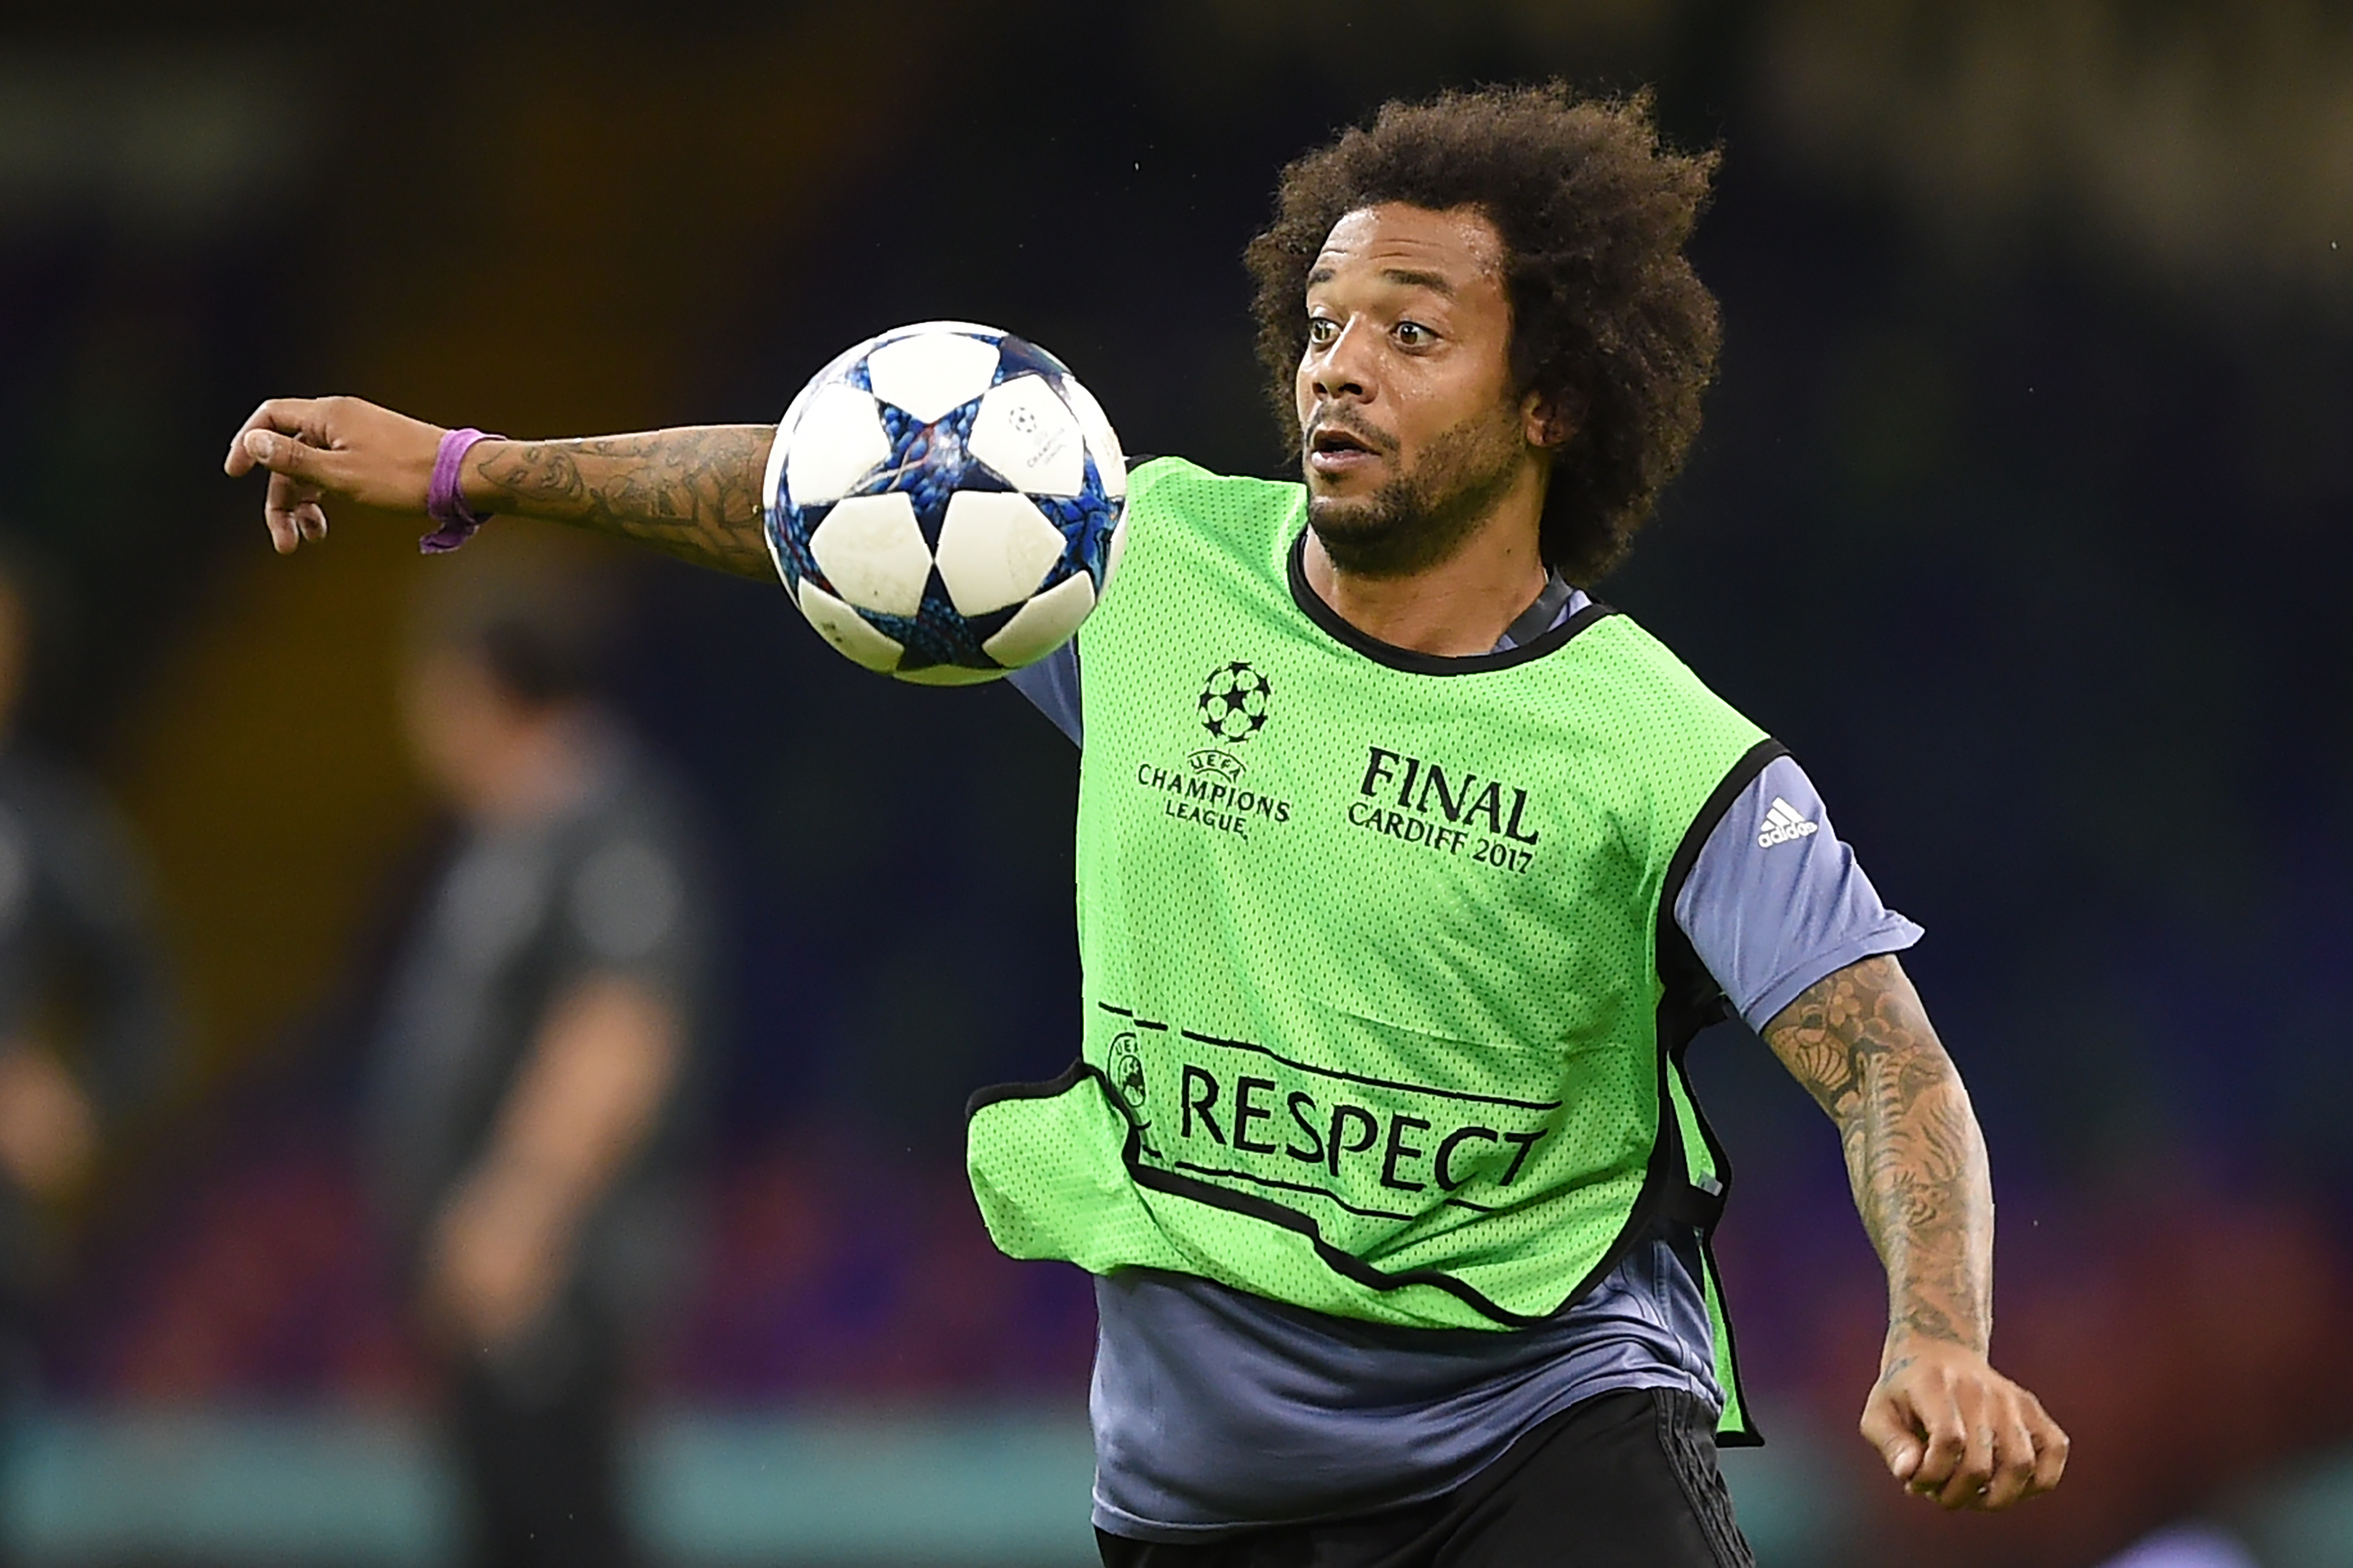 Real Madrid's Brazilian defender Marcelo takes part in a training session at The Principality Stadium in Cardiff, south Wales, on June 2, 2017, on the eve of the UEFA Champions League final football match between Juventus and Real Madrid. / AFP PHOTO / Filippo MONTEFORTE        (Photo credit should read FILIPPO MONTEFORTE/AFP/Getty Images)